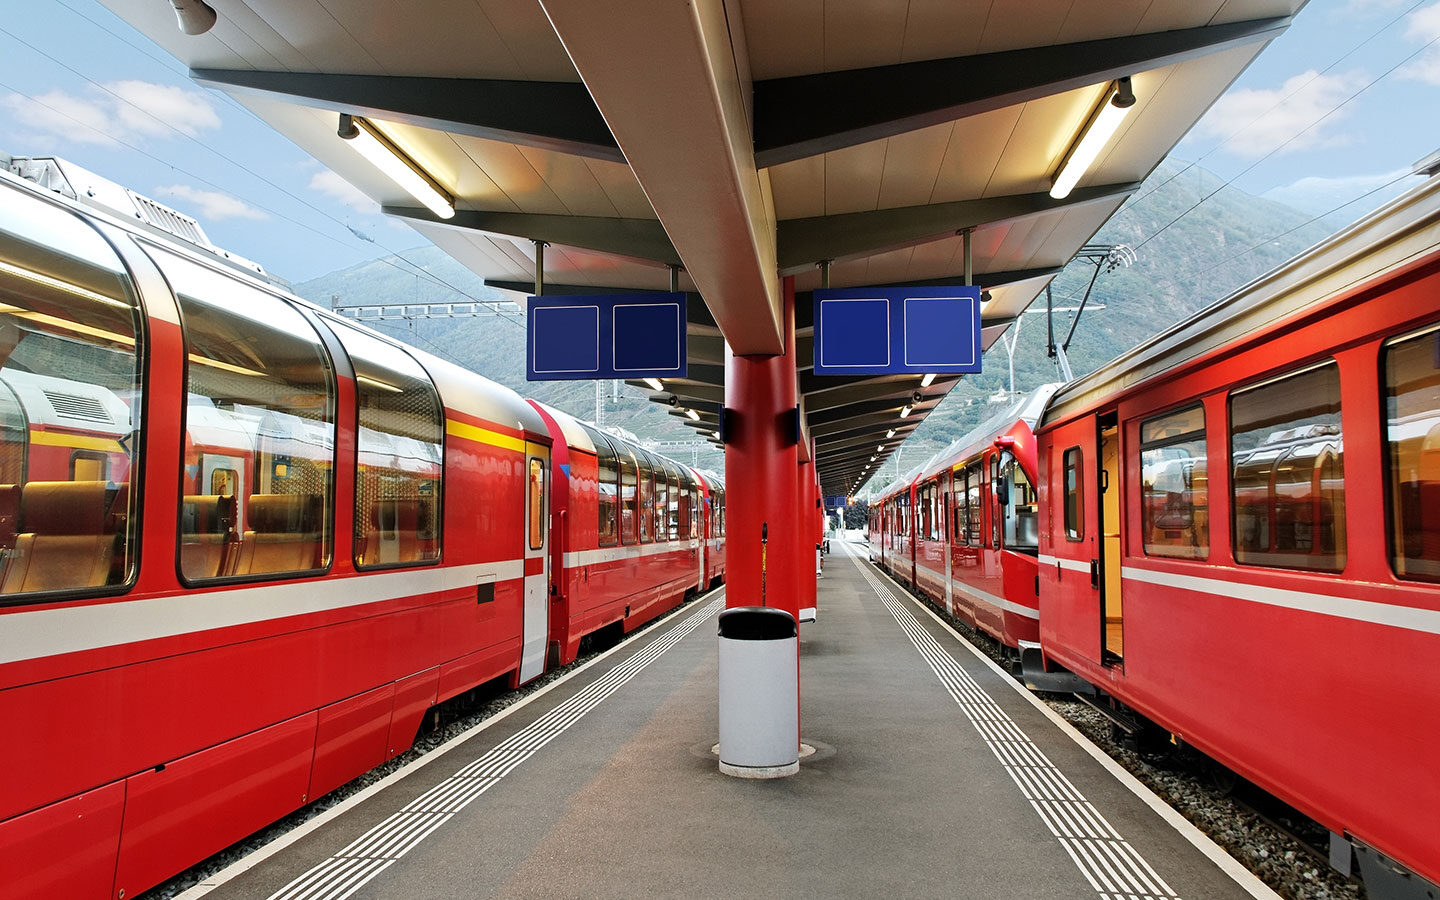 Local and panoramic Swiss trains together on the platform